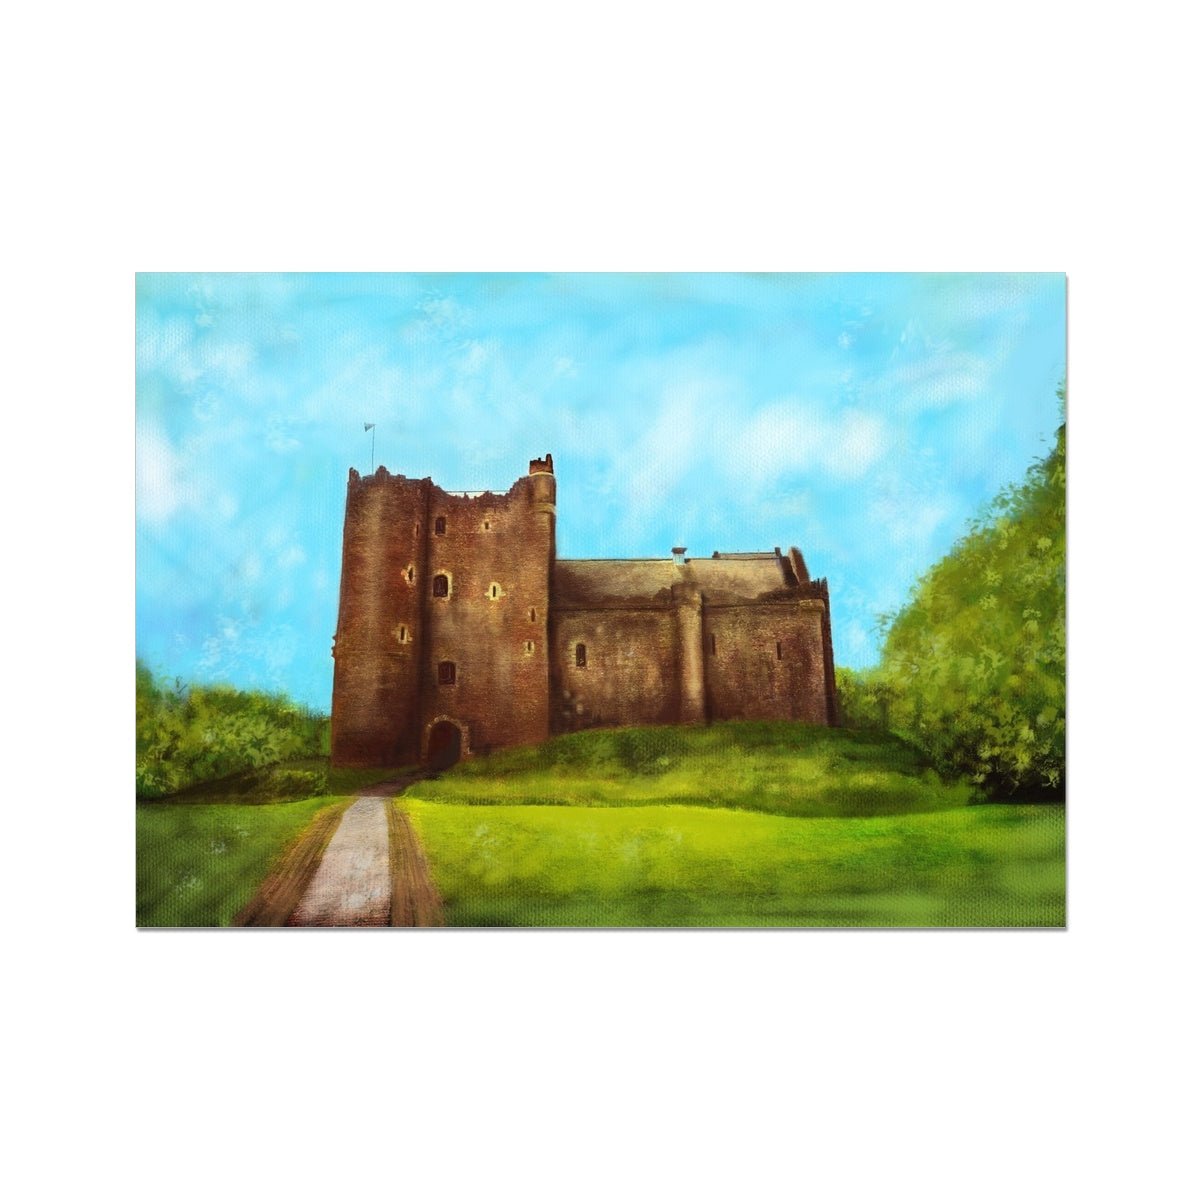 Doune Castle Painting | Fine Art Prints From Scotland-Unframed Prints-Historic & Iconic Scotland Art Gallery-A2 Landscape-Paintings, Prints, Homeware, Art Gifts From Scotland By Scottish Artist Kevin Hunter